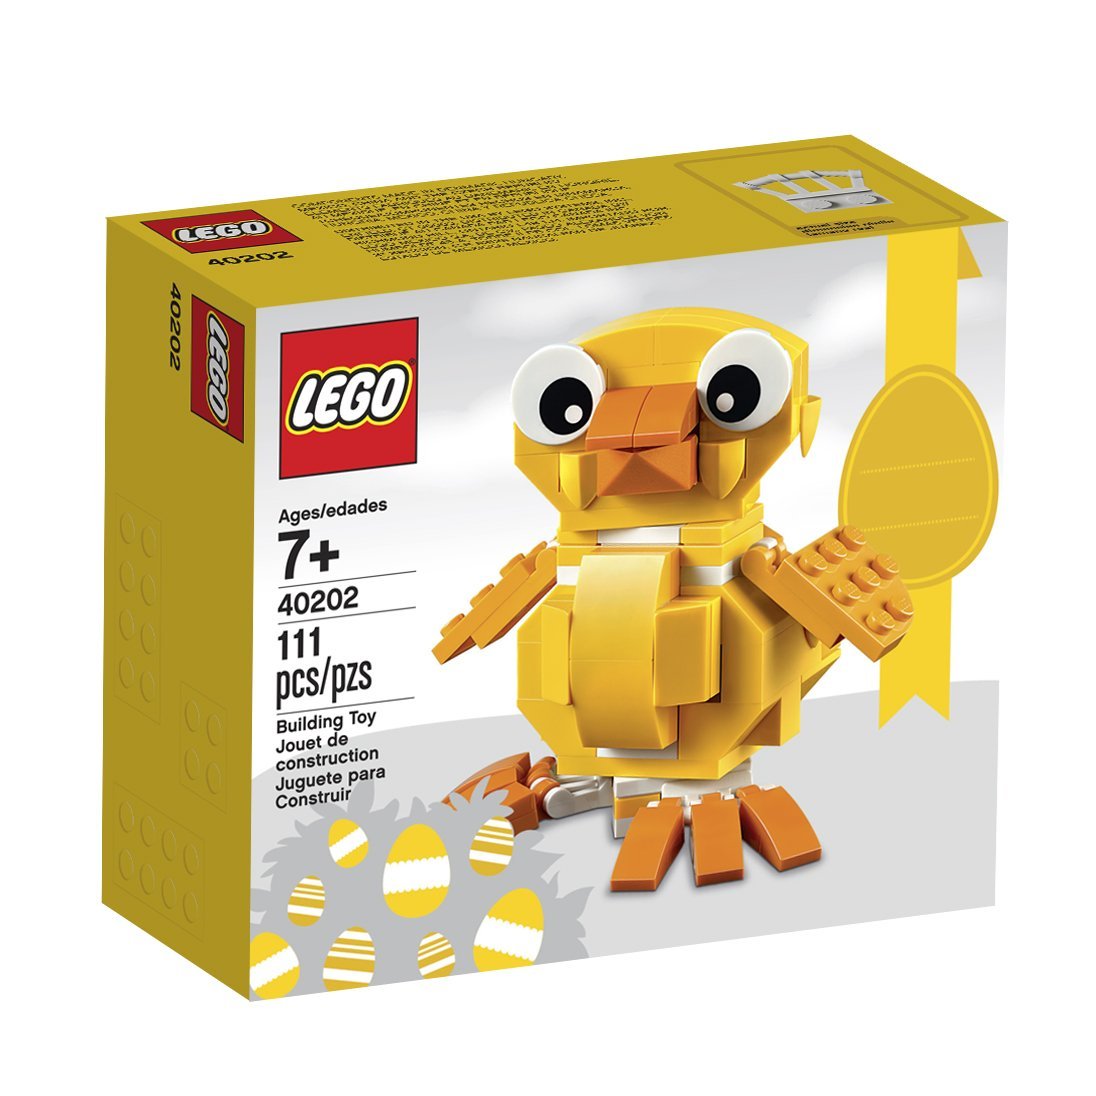 Lego Easter Chick – Just $9.99! Hurry!